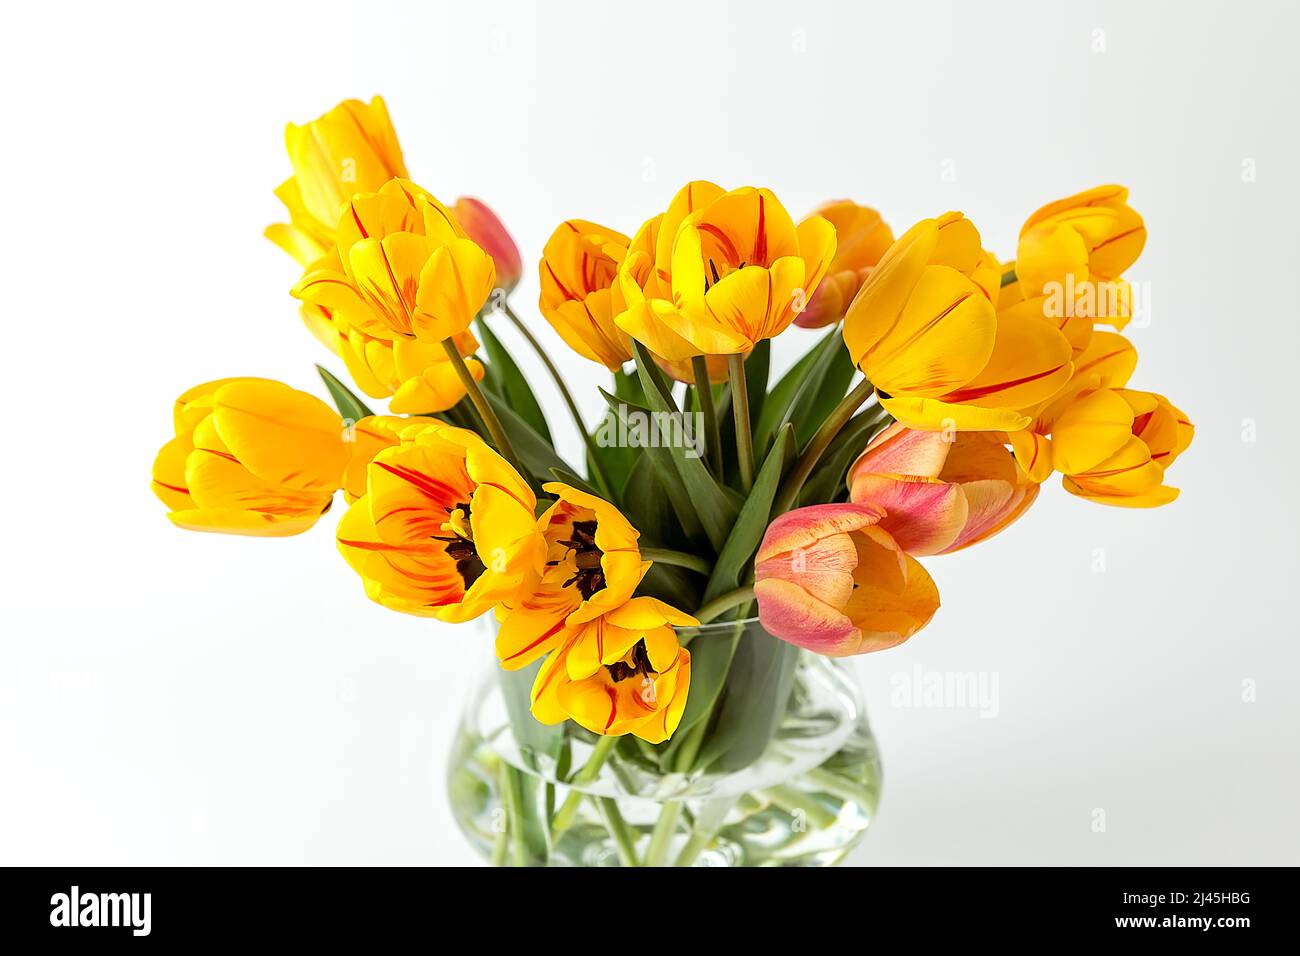 A large bouquet of large yellow tulips in a glass vase on a white background. An elegant composition for your invitation text, congratulations. Stock Photo